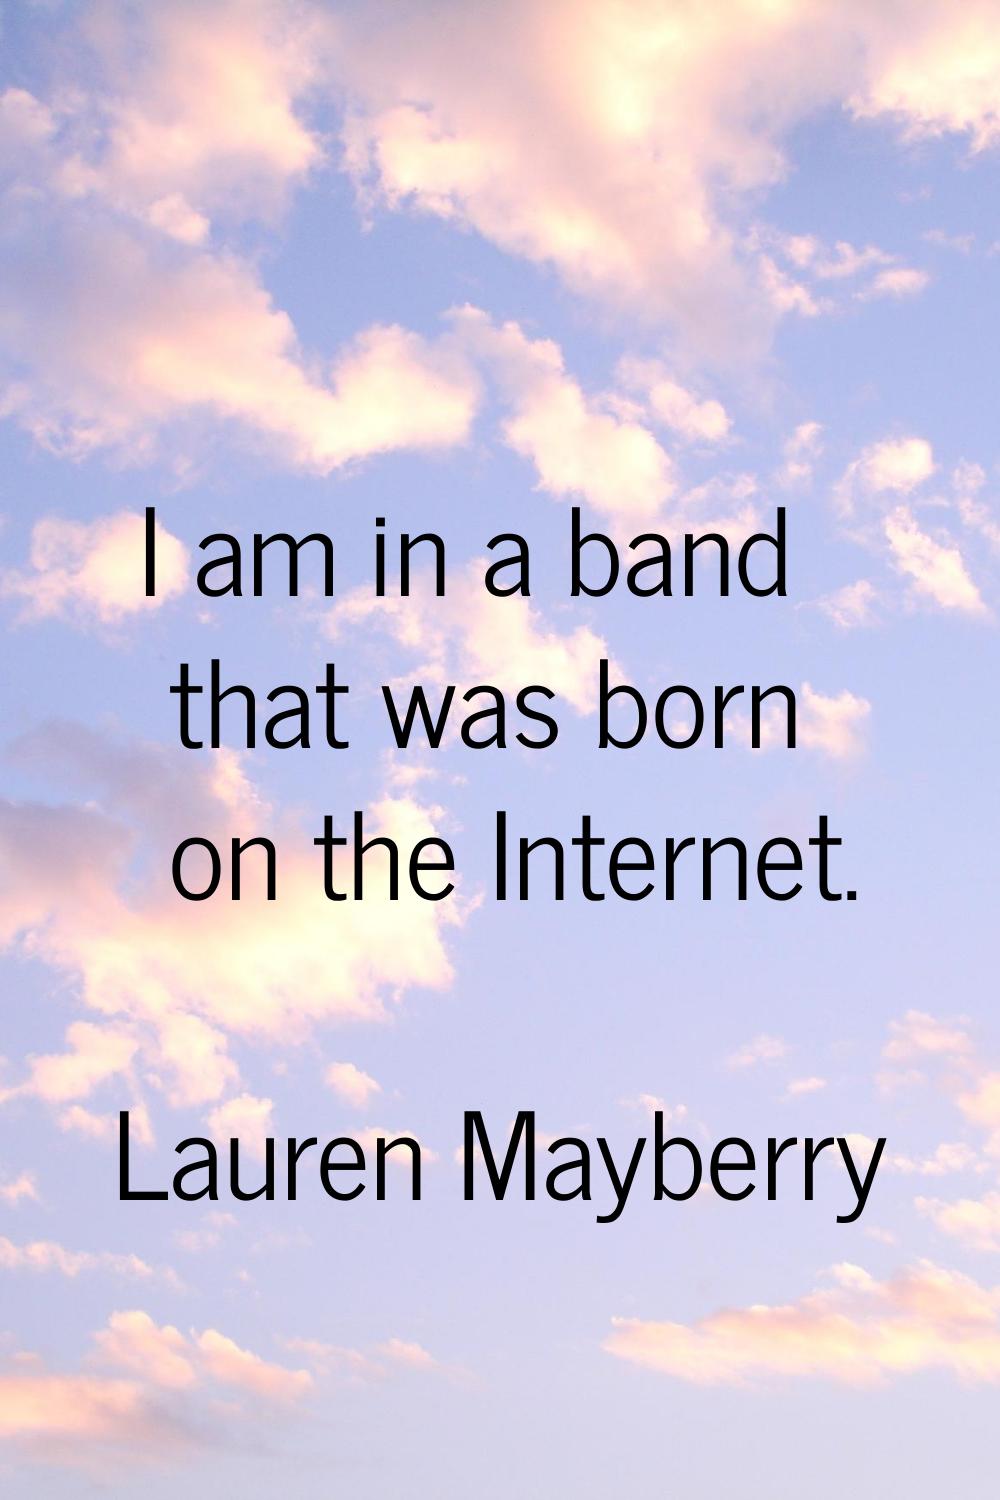 I am in a band that was born on the Internet.